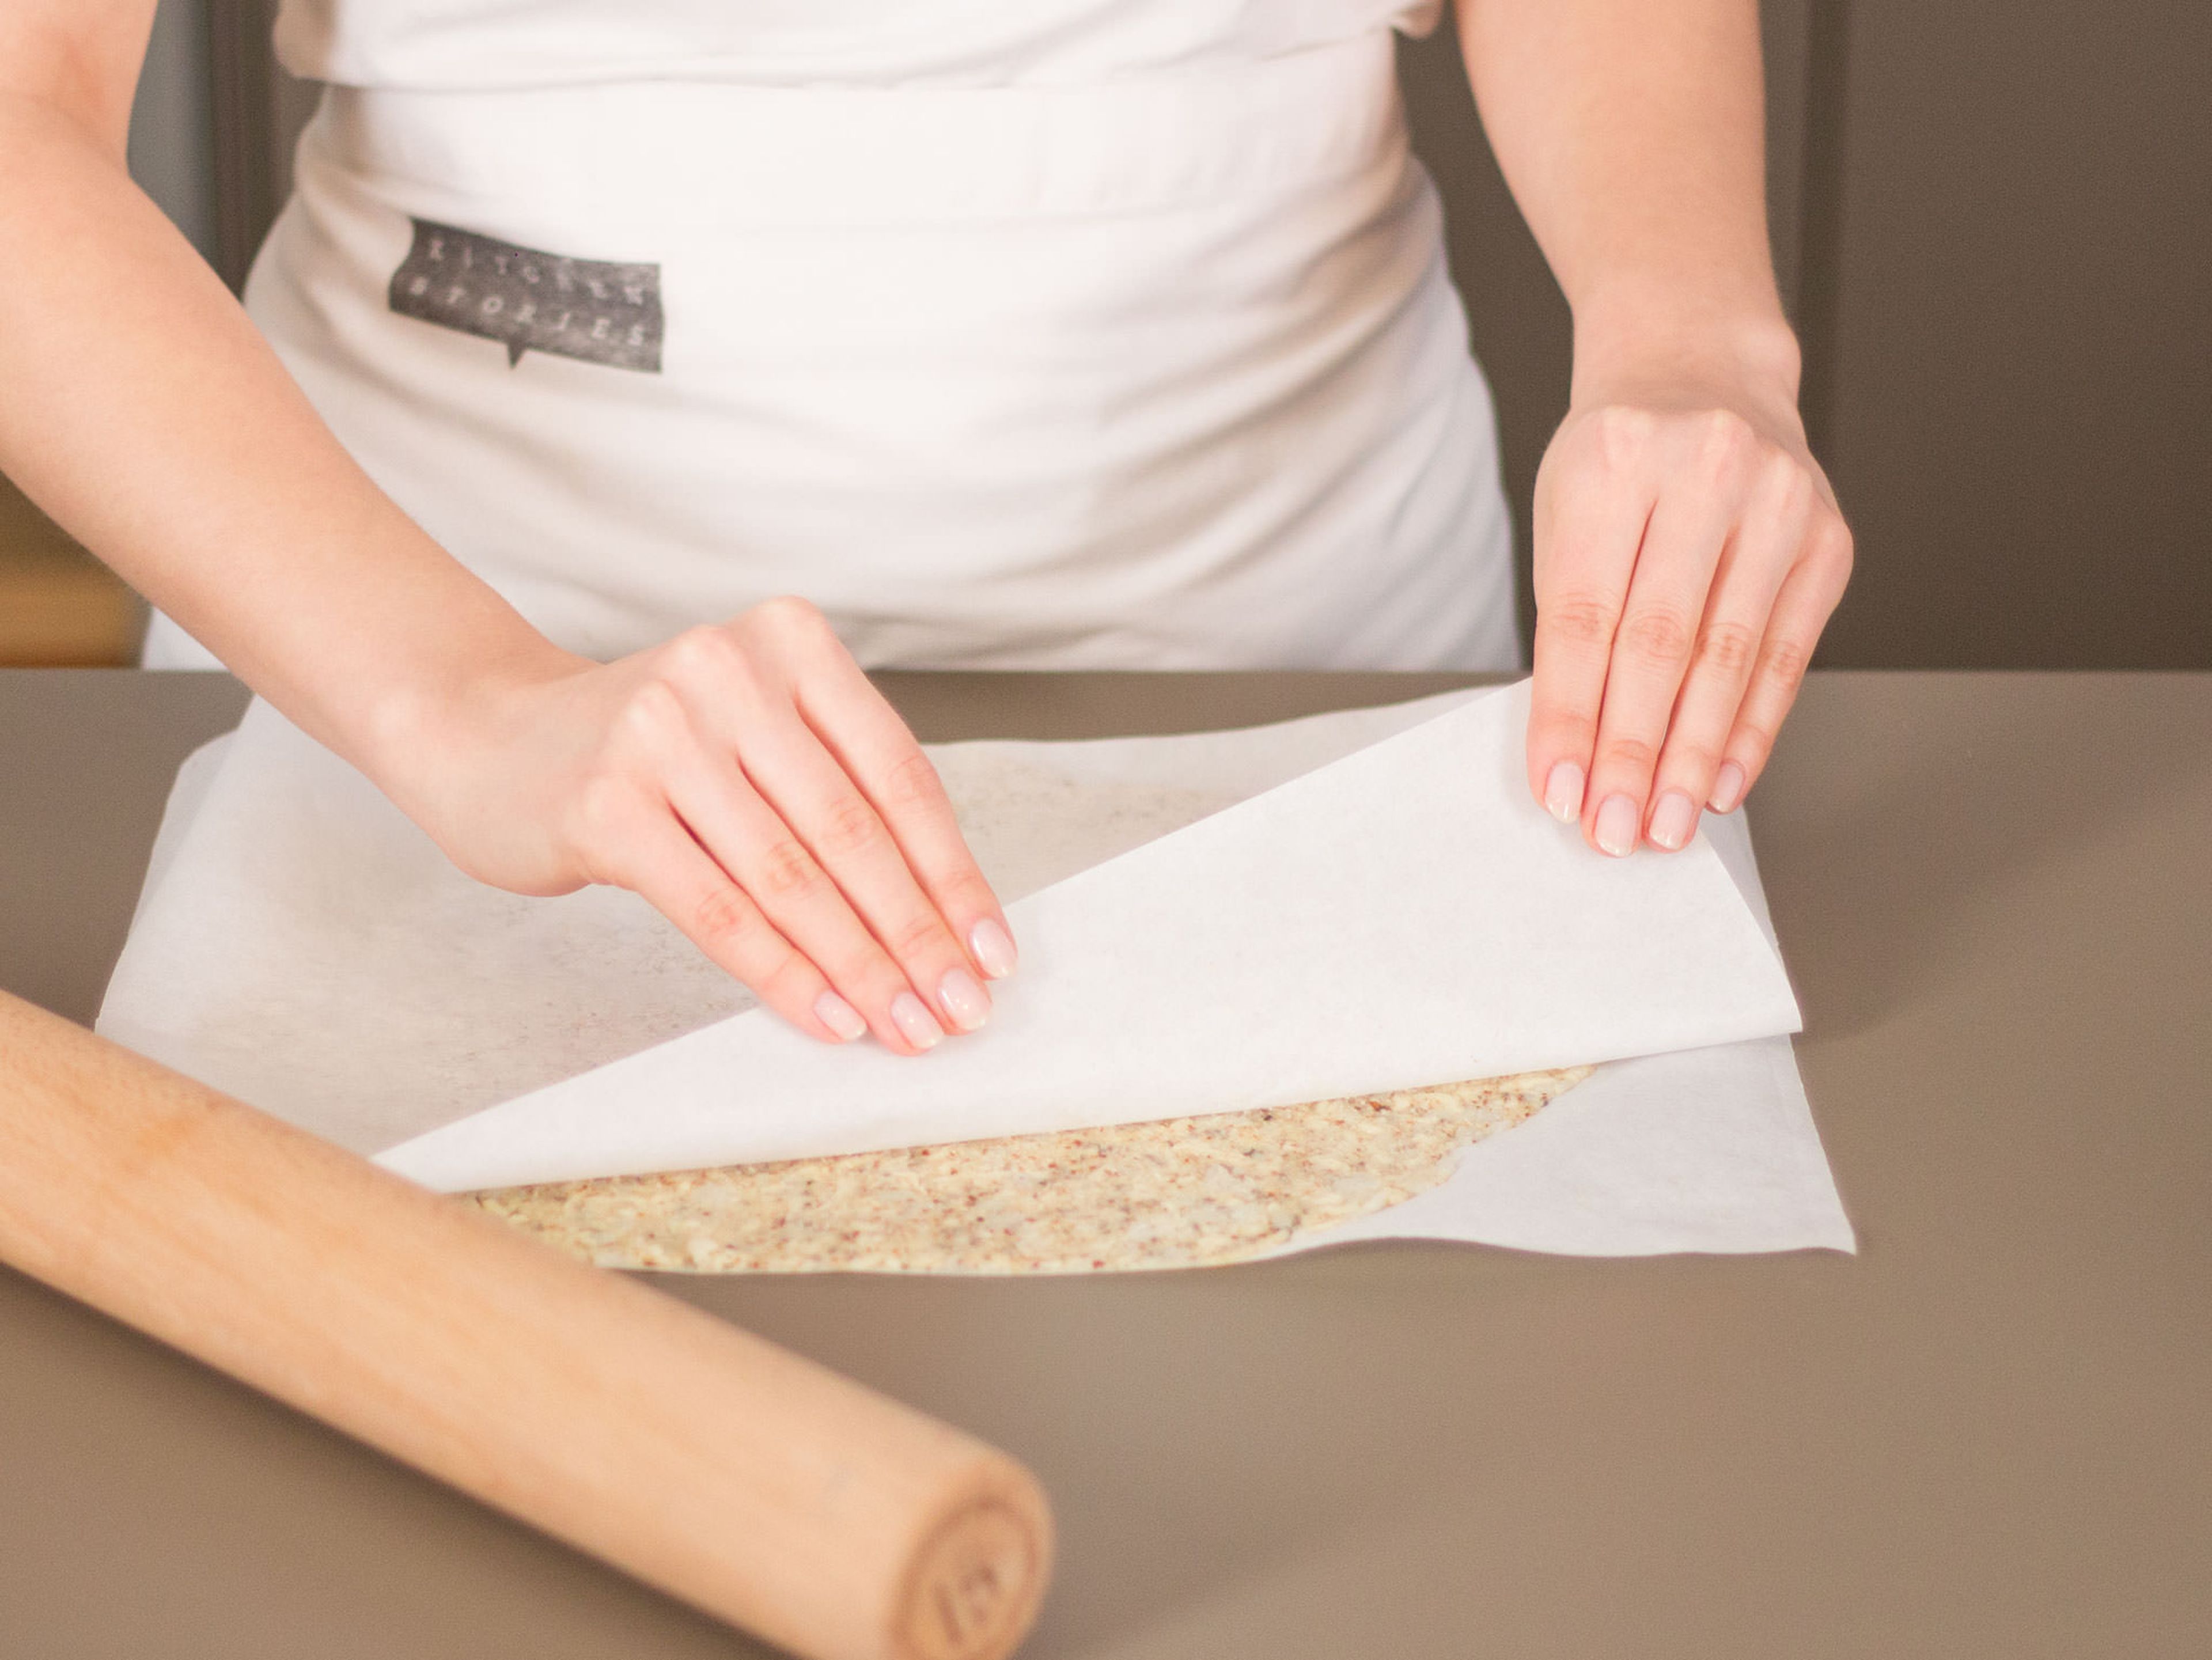 Place dough between two sheets of parchment paper and roll out using a rolling pin. Discard top layer of parchment paper, transfer to a baking sheet, and bake in preheated oven at 180°C/350°F for approx. 15 – 20 min.